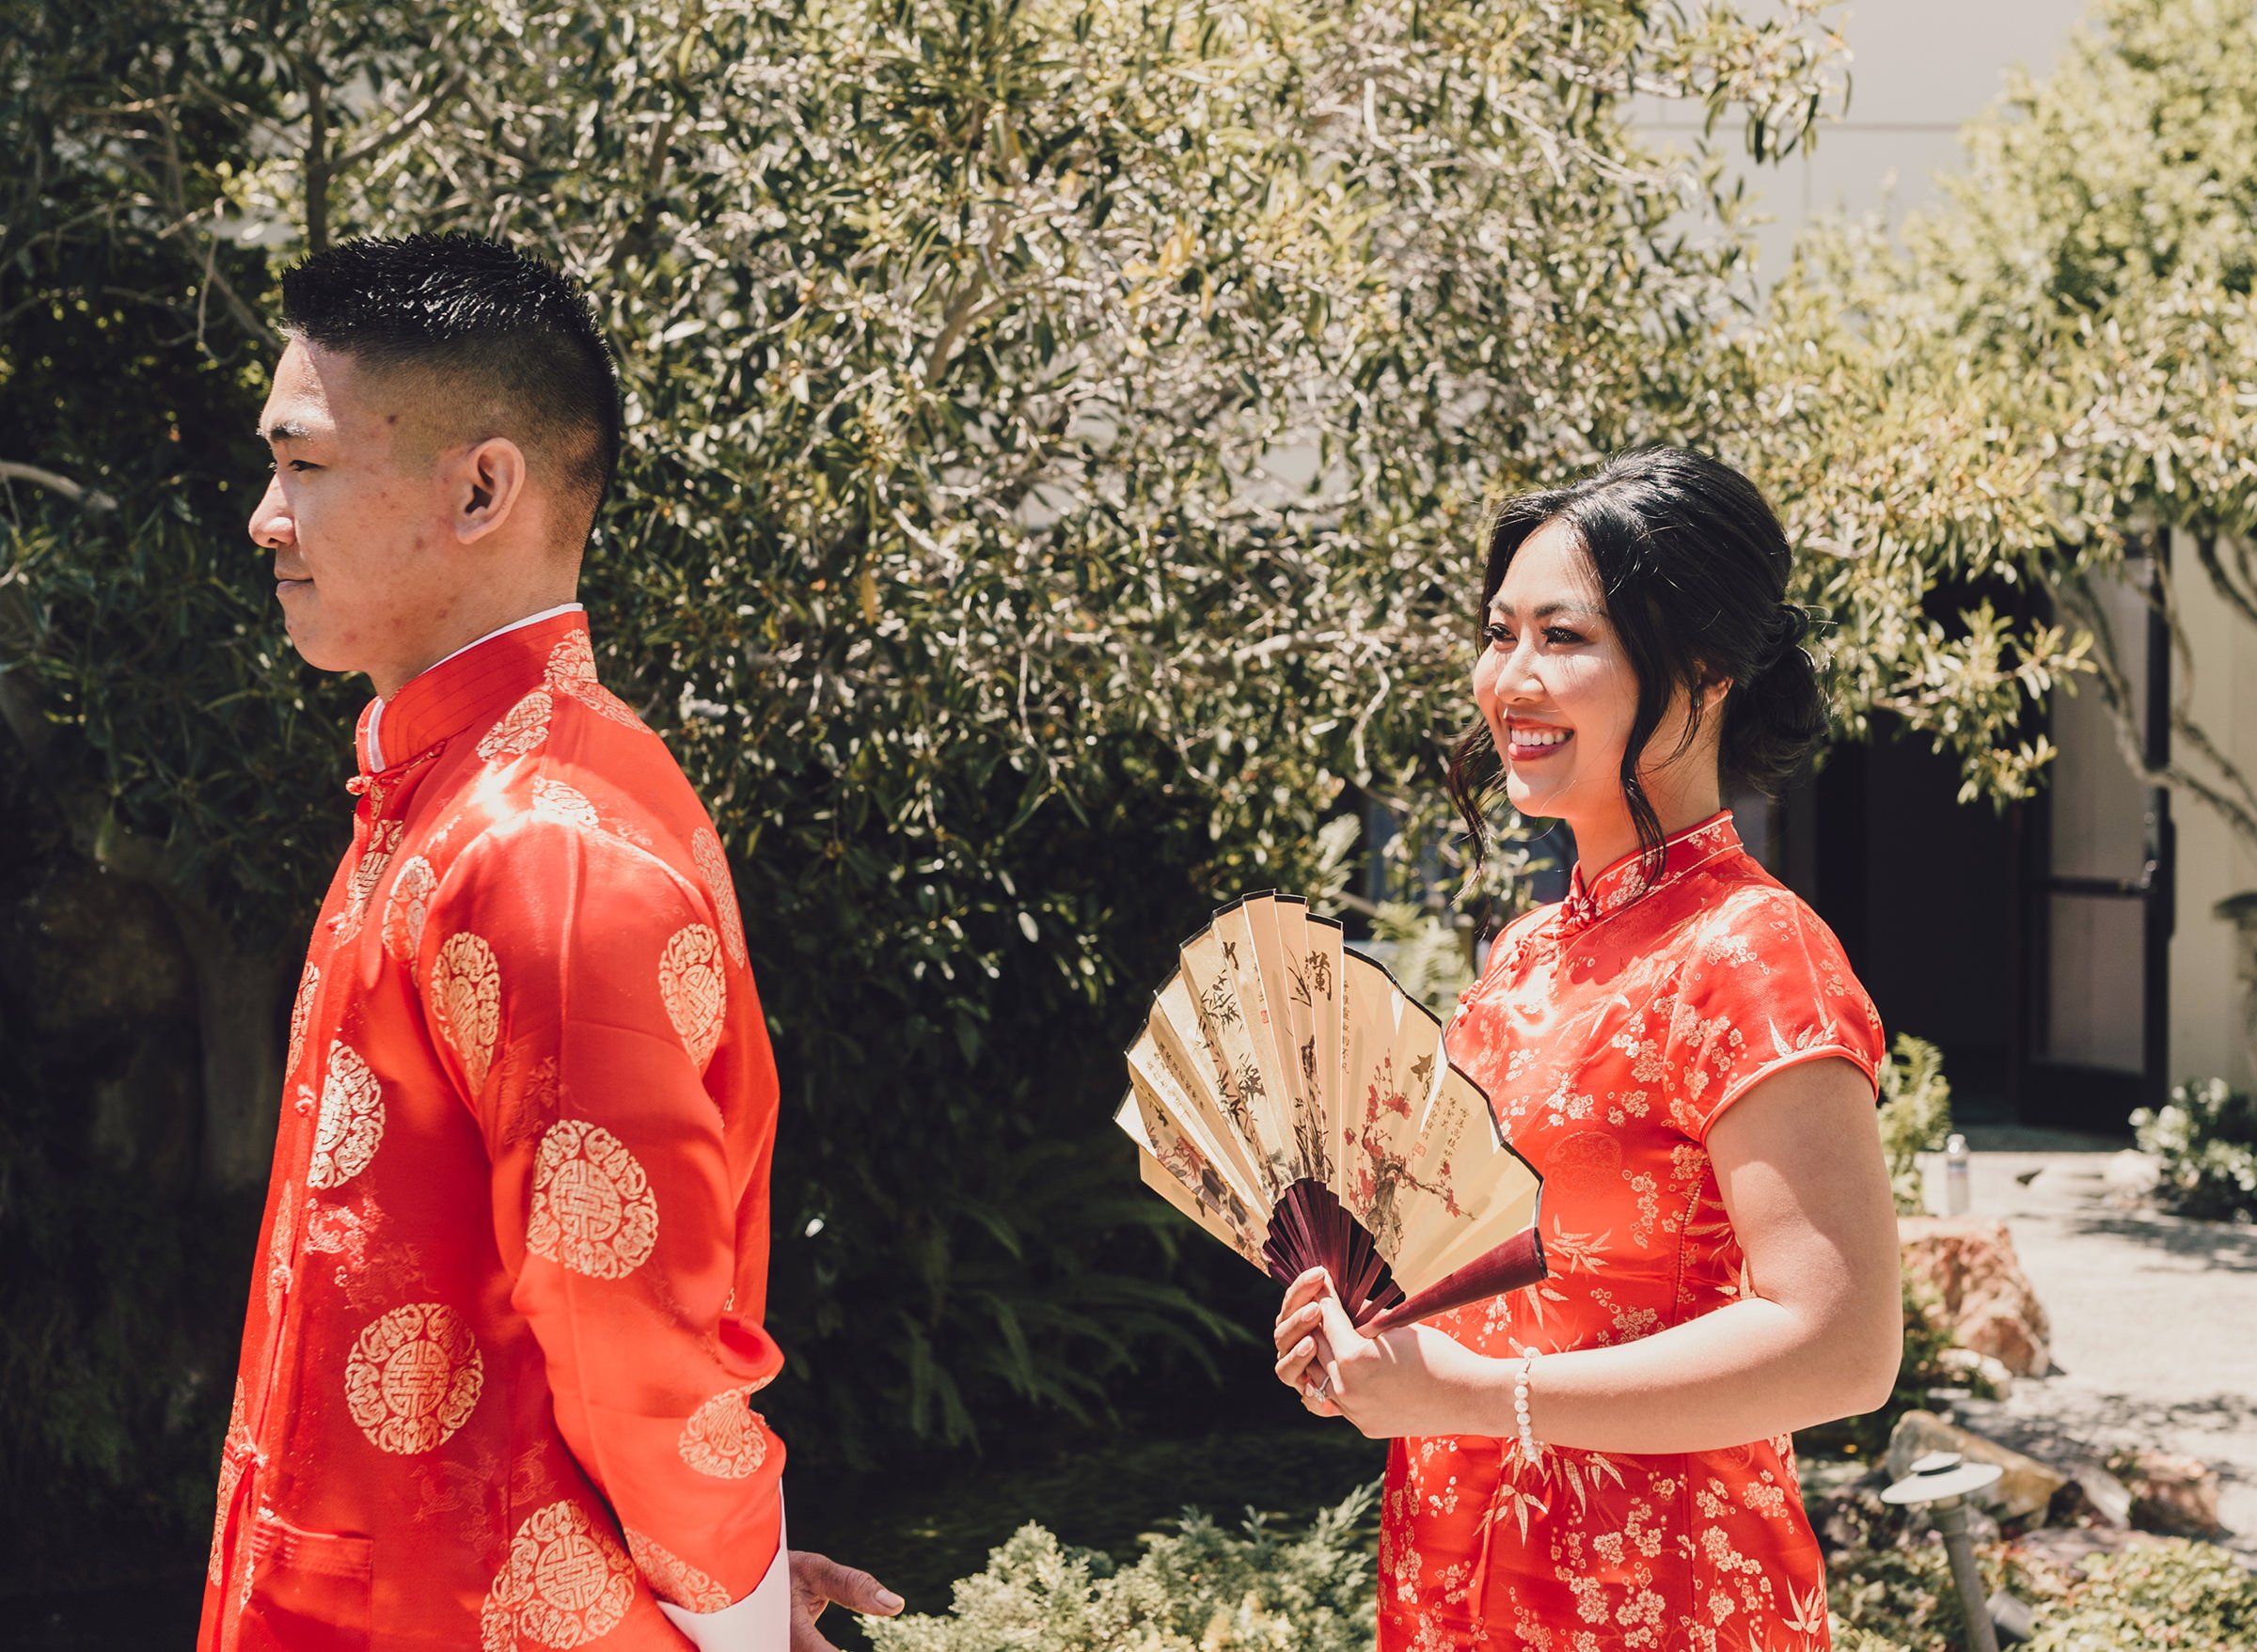 modern-asian-american-wedding-first-look-traditional-chinese-attire-socal-photographer-4.jpg